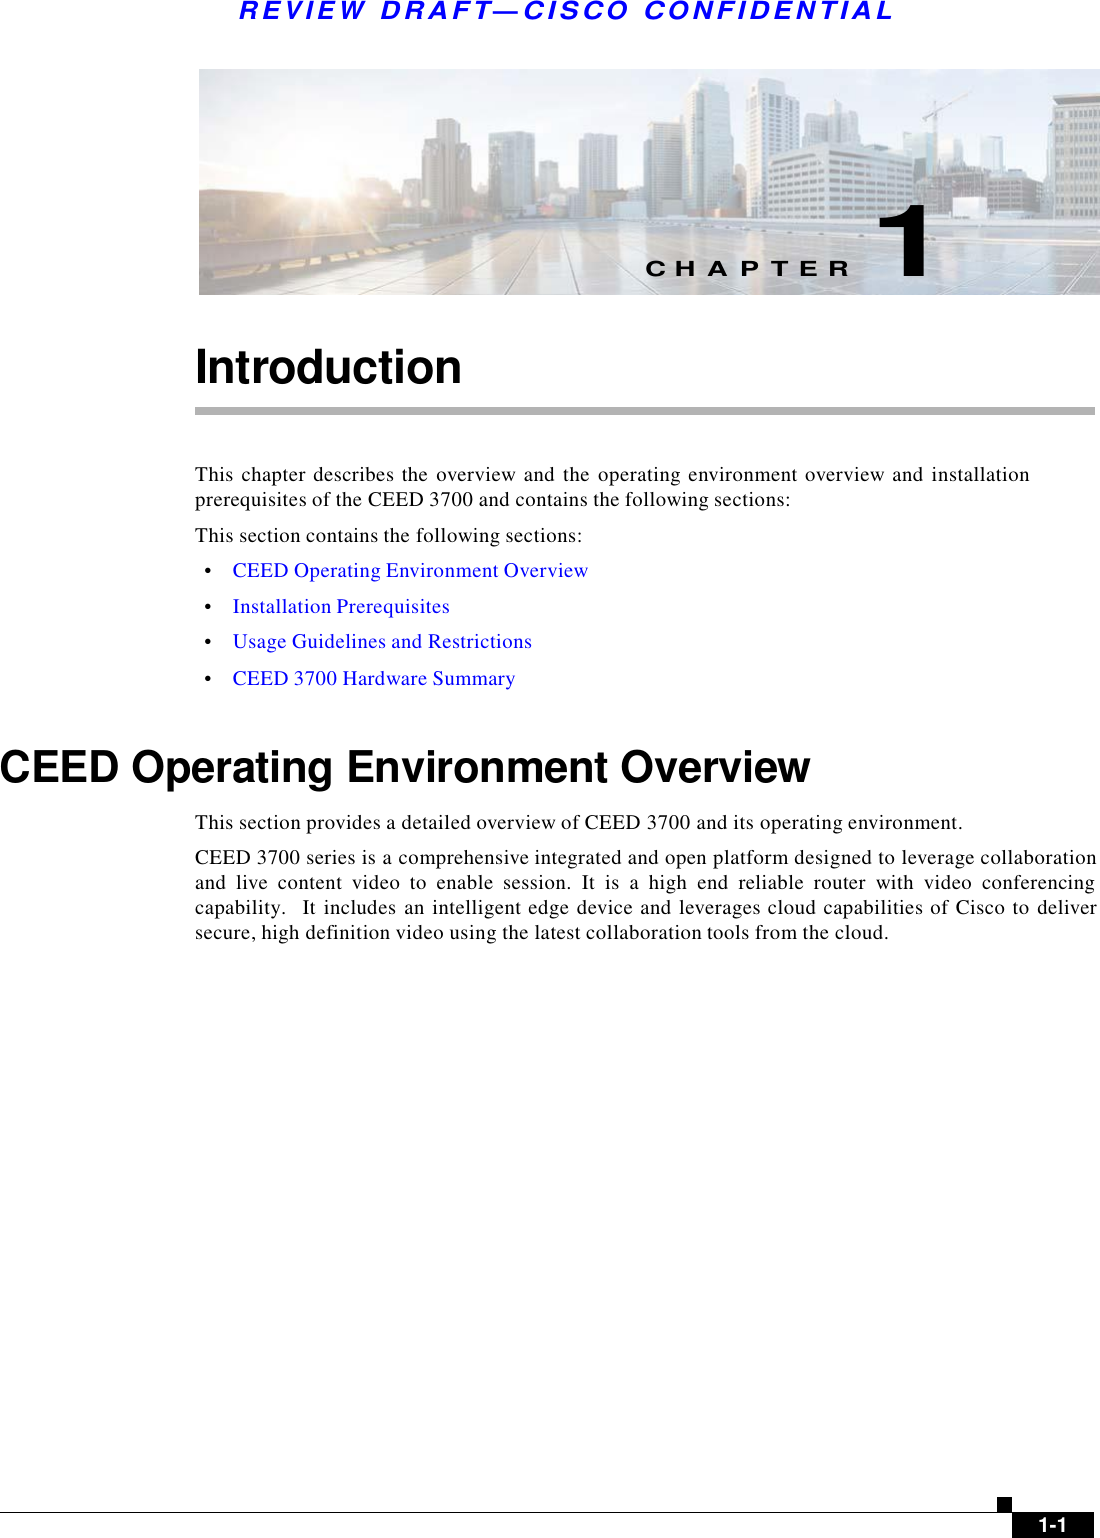  R E V I E W  DR AFT — CISC O  C O NF IDE N TIAL          C H A P T E R  1   Introduction    This chapter  describes the  overview and  the  operating environment overview and  installation prerequisites of the CEED 3700 and contains the following sections: This section contains the following sections:  •    CEED Operating Environment Overview  •    Installation Prerequisites  •    Usage Guidelines and Restrictions  •    CEED 3700 Hardware Summary    CEED Operating Environment Overview  This section provides a detailed overview of CEED 3700 and its operating environment. CEED 3700 series is a comprehensive integrated and open platform designed to leverage collaboration and  live  content  video  to  enable  session.  It  is  a  high  end  reliable  router  with  video  conferencing capability.   It includes an intelligent edge device and leverages cloud capabilities of Cisco to deliver secure, high definition video using the latest collaboration tools from the cloud.                     1-1 